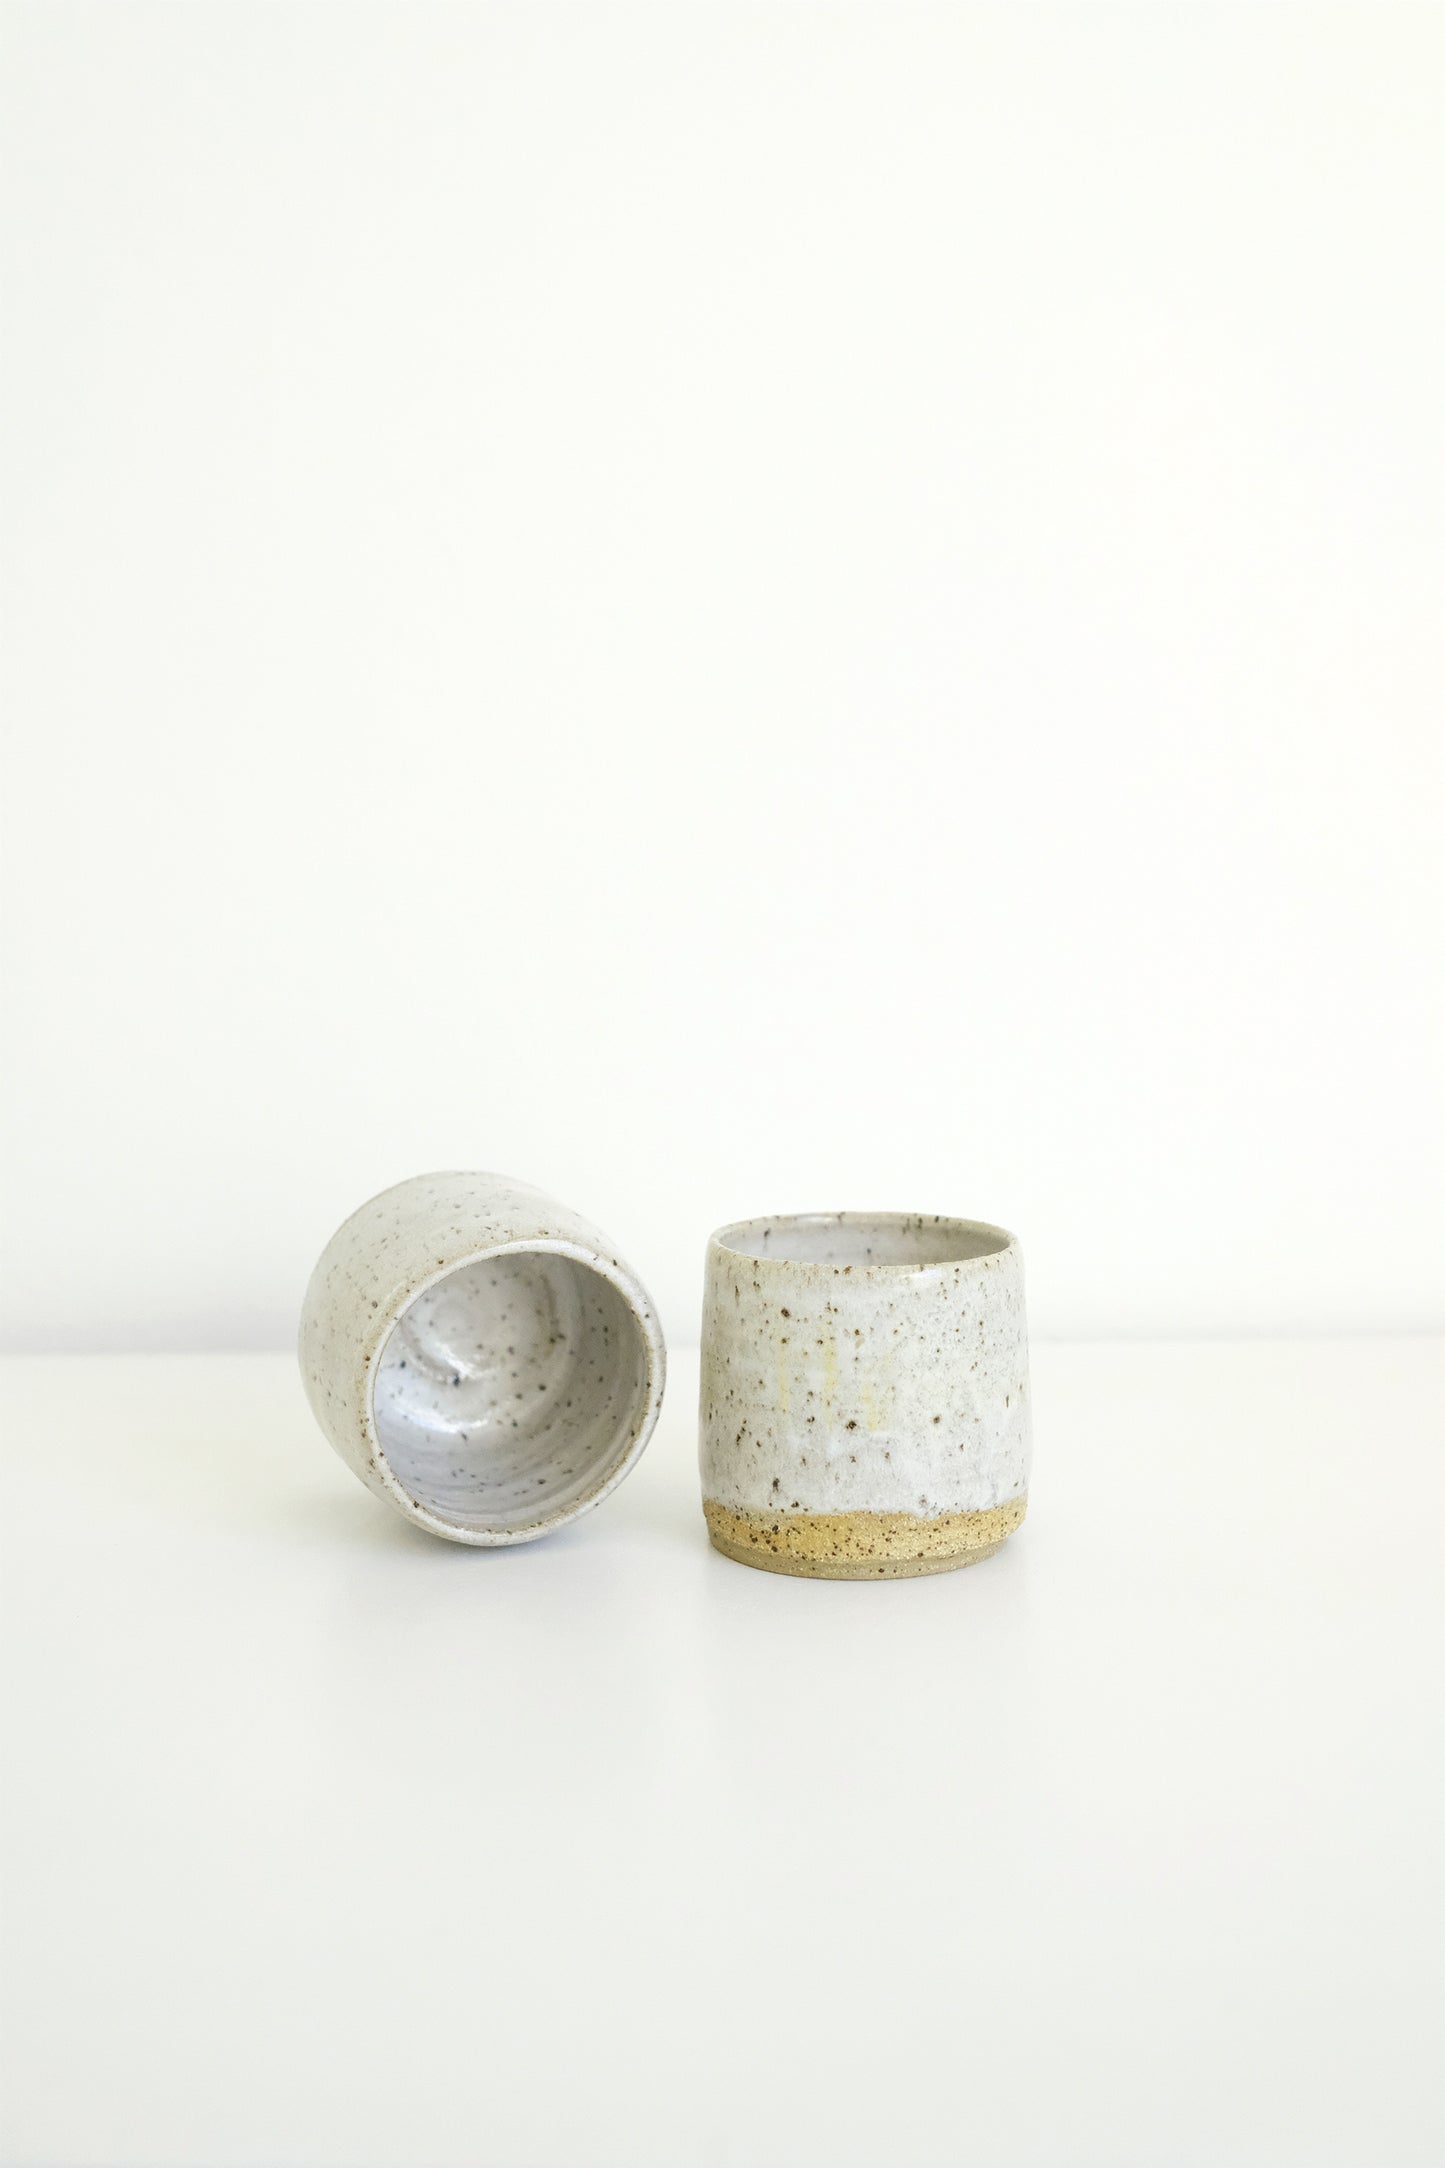 speckled tumblers #2 - set of 2